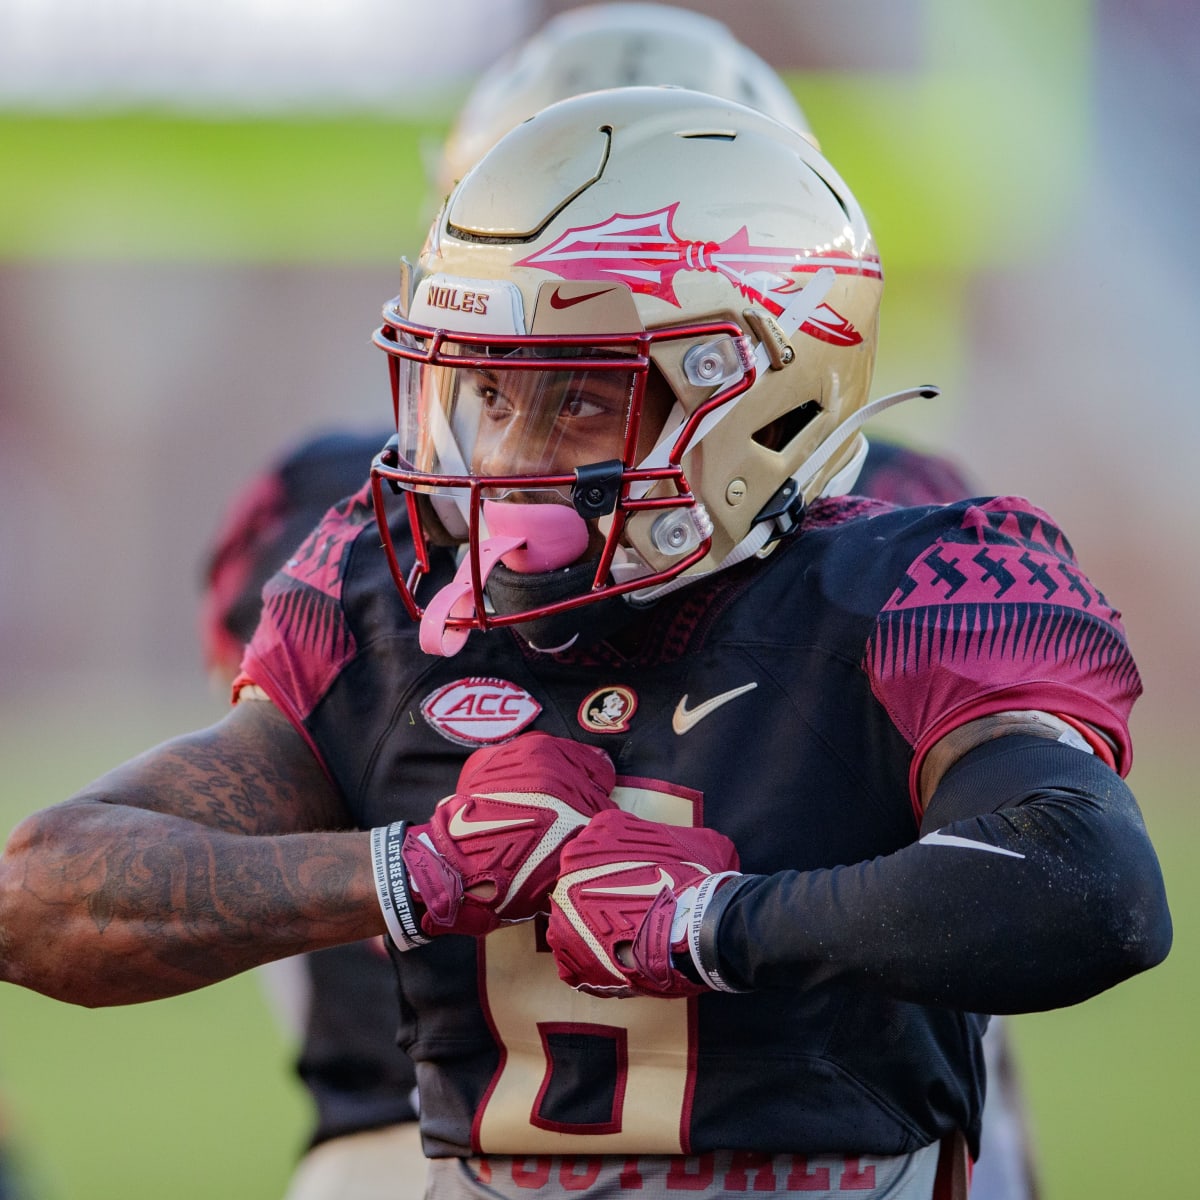 Florida State Gear on X: Jerseys will be available at